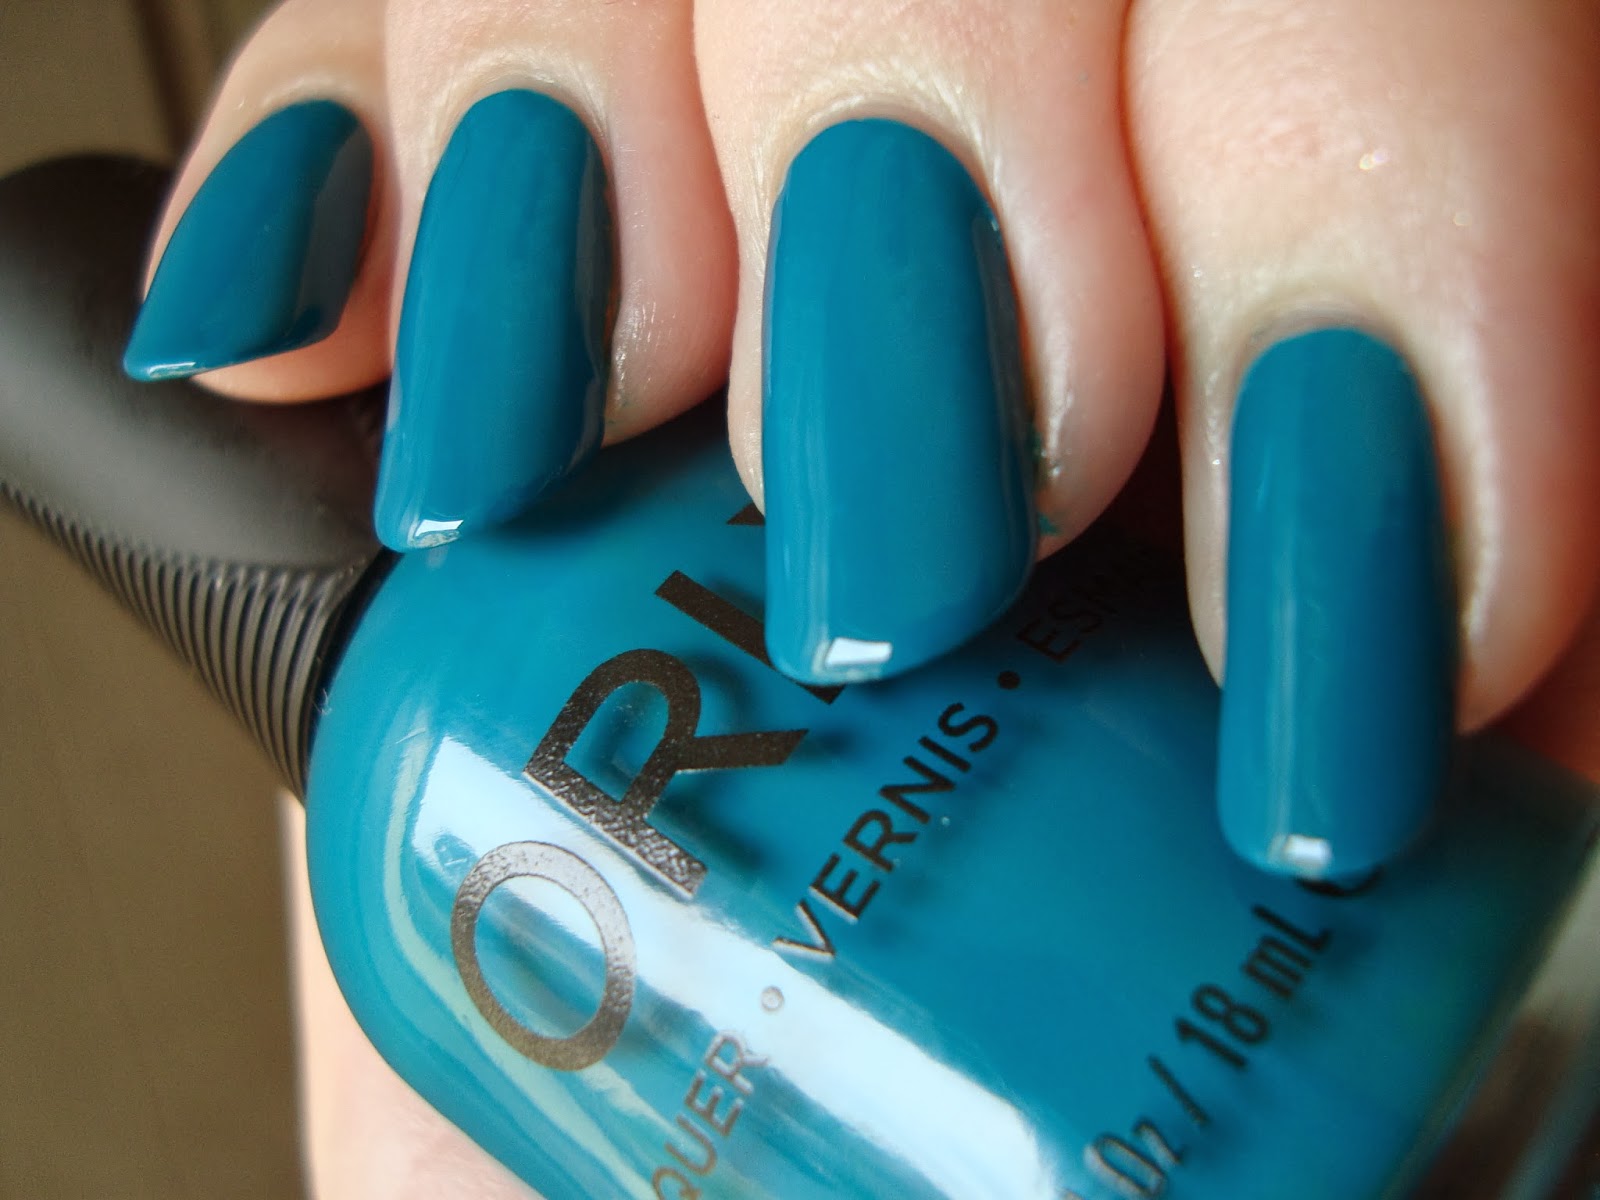 My Picks from Orly Surreal | Pretty Girl Science